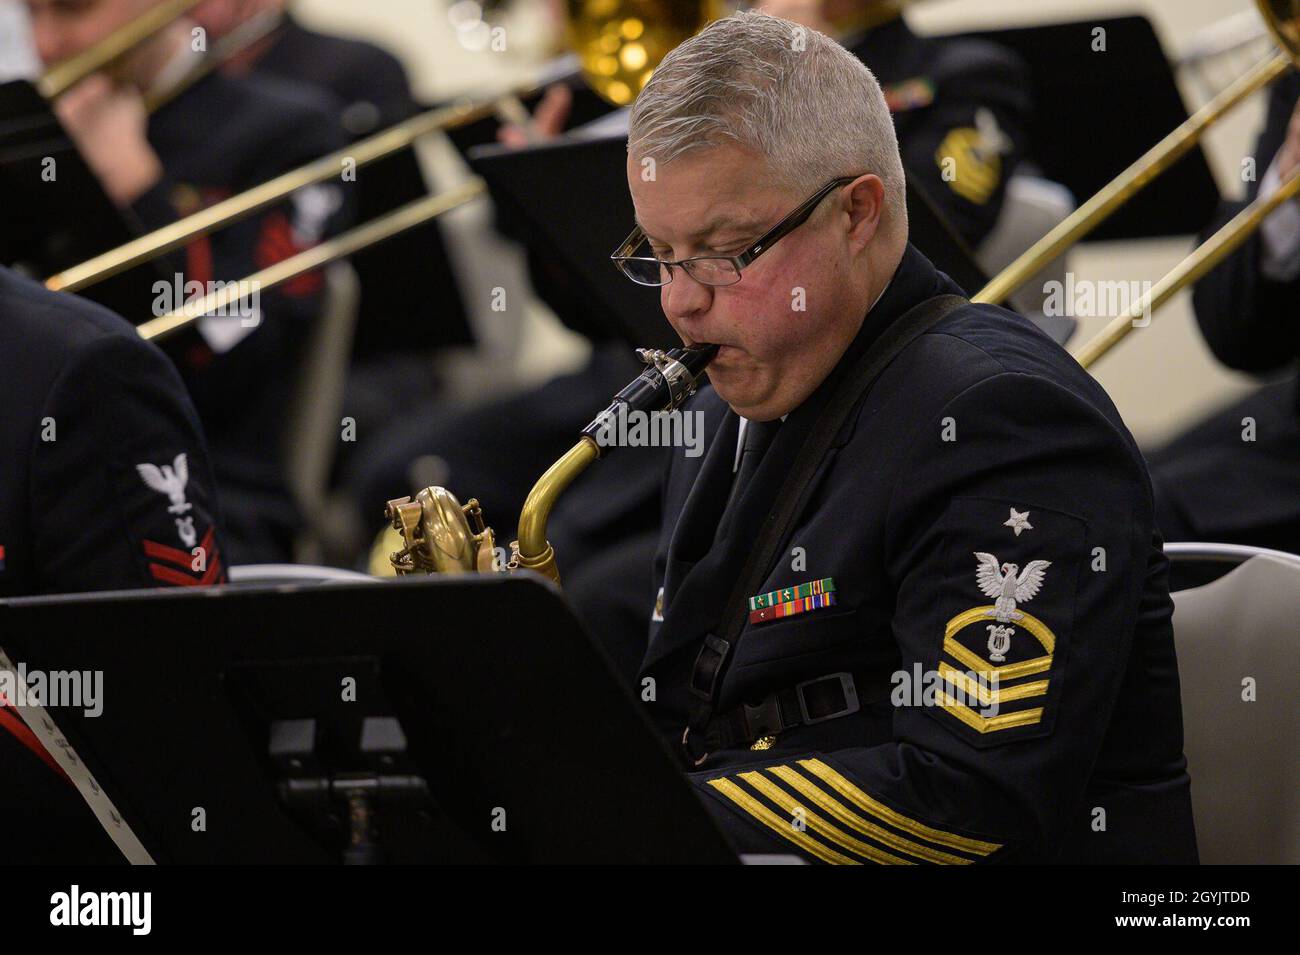 NEW ORLEANS (Jan. 10, 2020) Senior Chief Musician Robert Holmes, from McLean, Va., performs with the U.S. Navy Band Commodores jazz ensemble during the 11th annual Jazz Education Network Conference in New Orleans. The Navy Band presented clinics and performances at the conference, connecting with music students, educators and performers. (U.S. Navy photo by Senior Chief Musician Adam Grimm/Released) Stock Photo